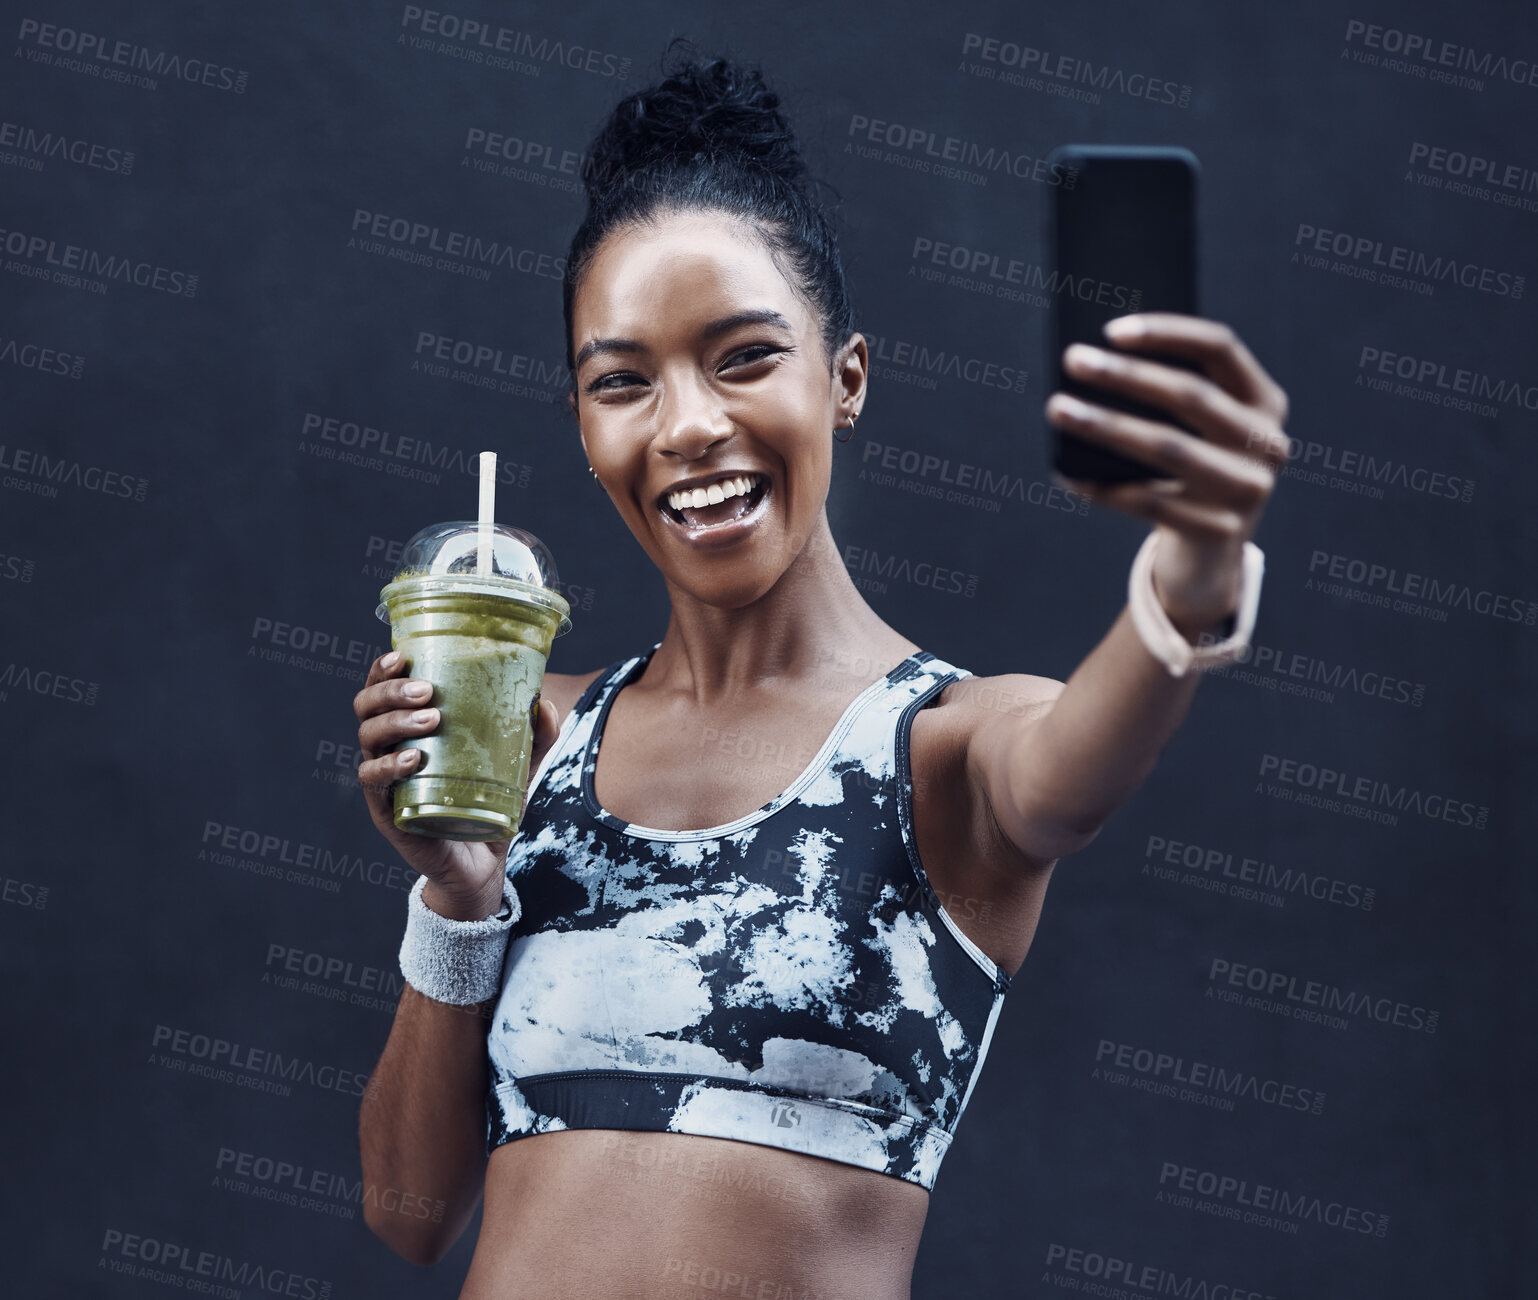 Buy stock photo One happy young mixed race woman drinking a healthy green detox smoothie and taking selfies on phone while exercising against dark background. Female athlete sipping on fresh nutritious fruit juice in plastic cup while taking photos for social media